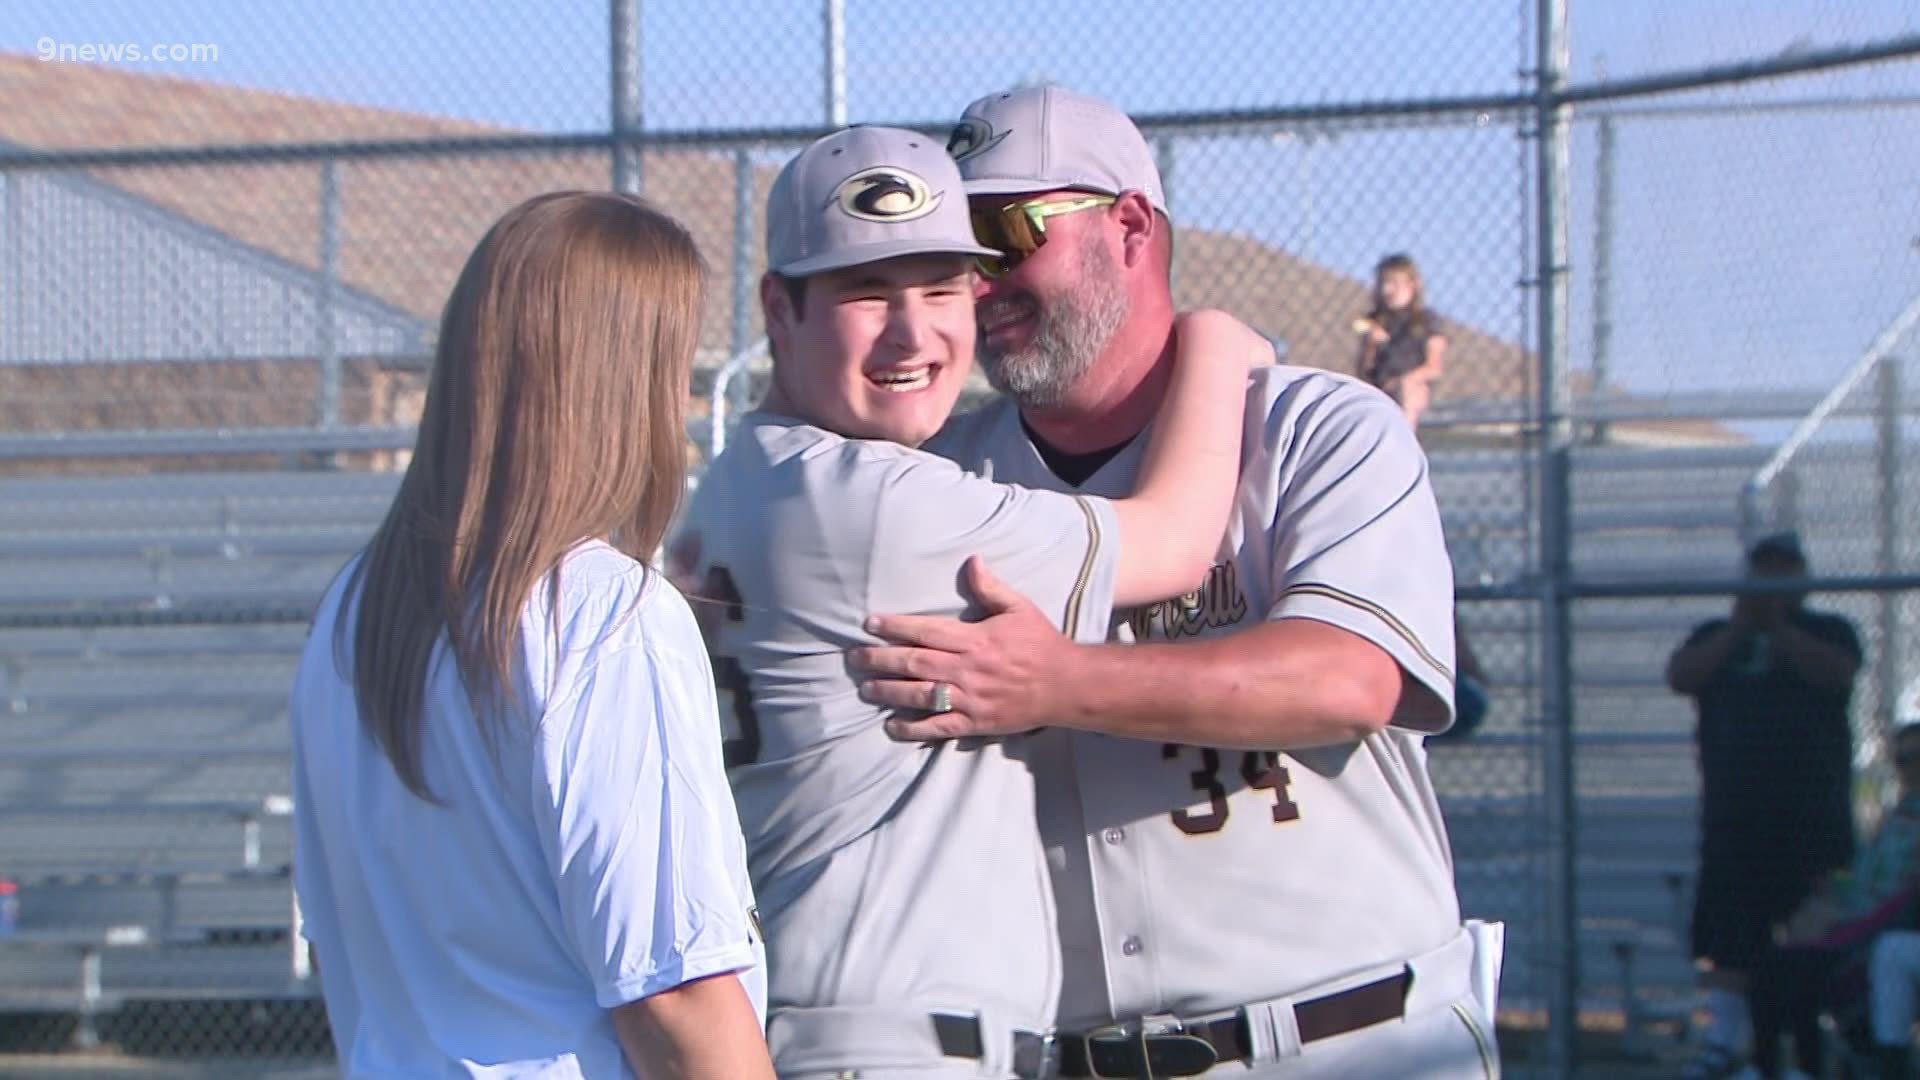 For four years, a team manager at Prairie View High School in Henderson has helped support his team. But on Wednesday, he stepped into the batter's box.